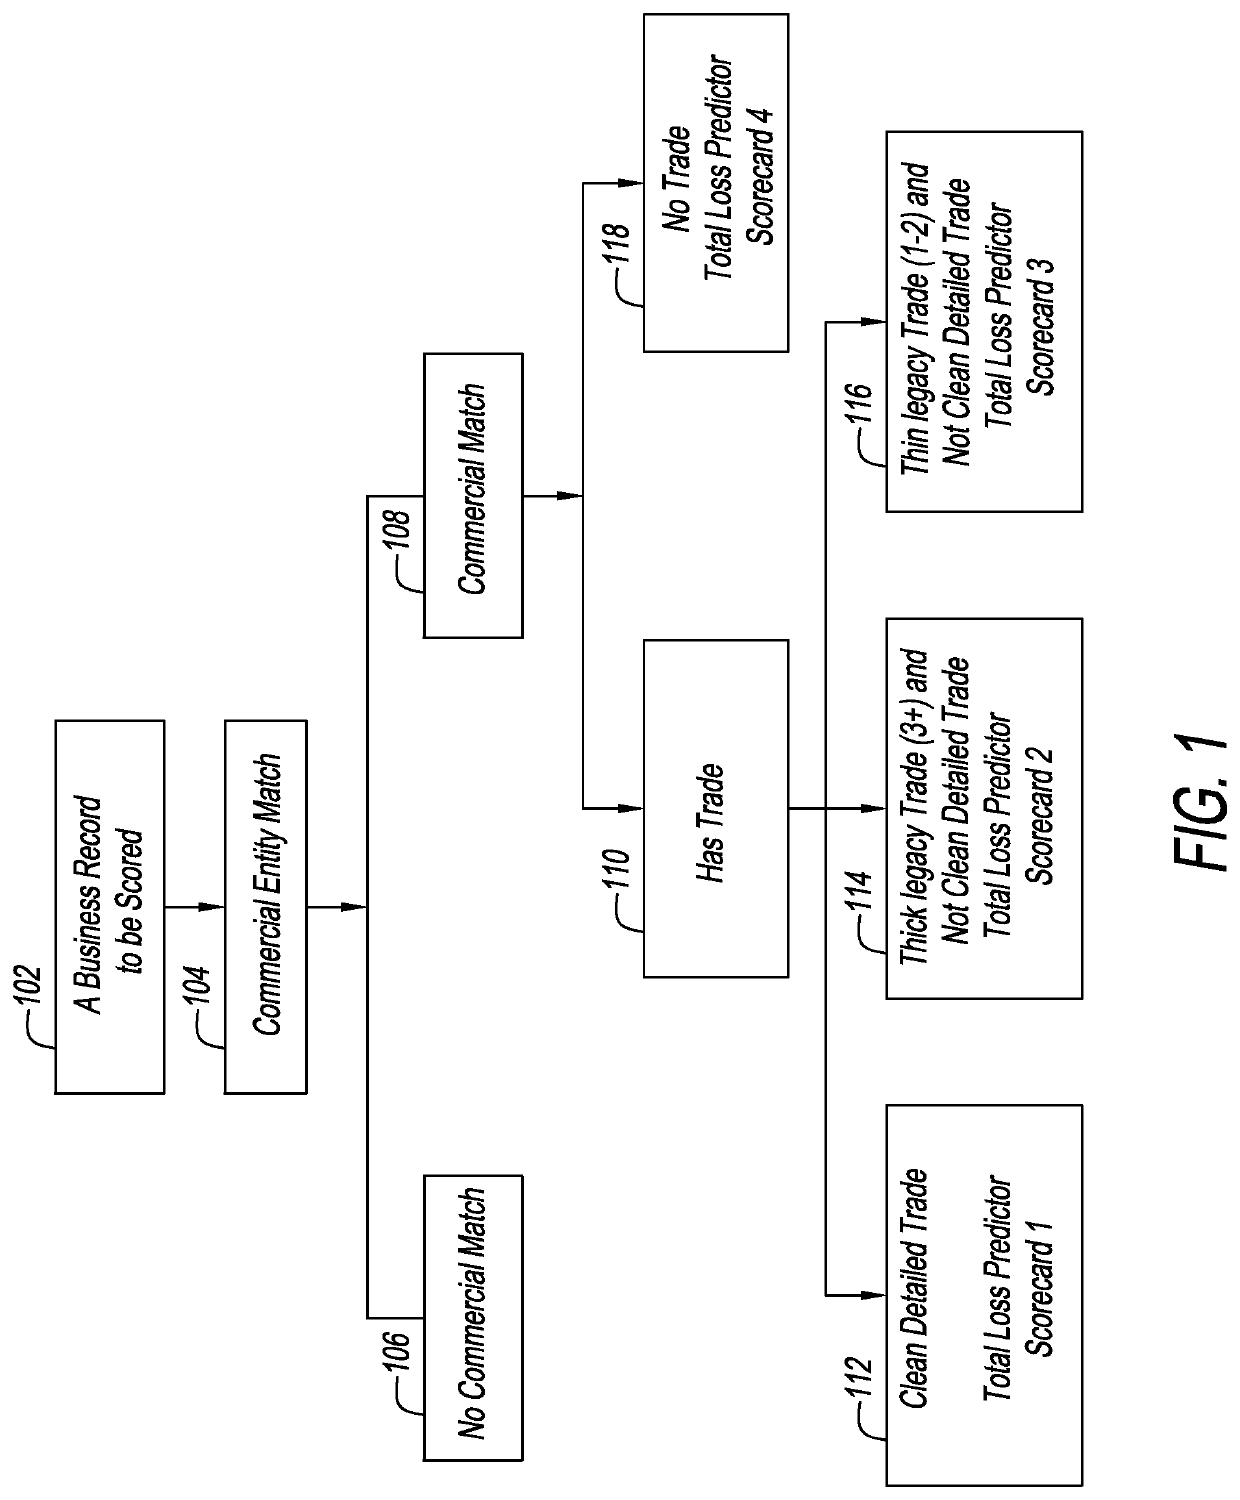 Apparatus and method for total loss prediction